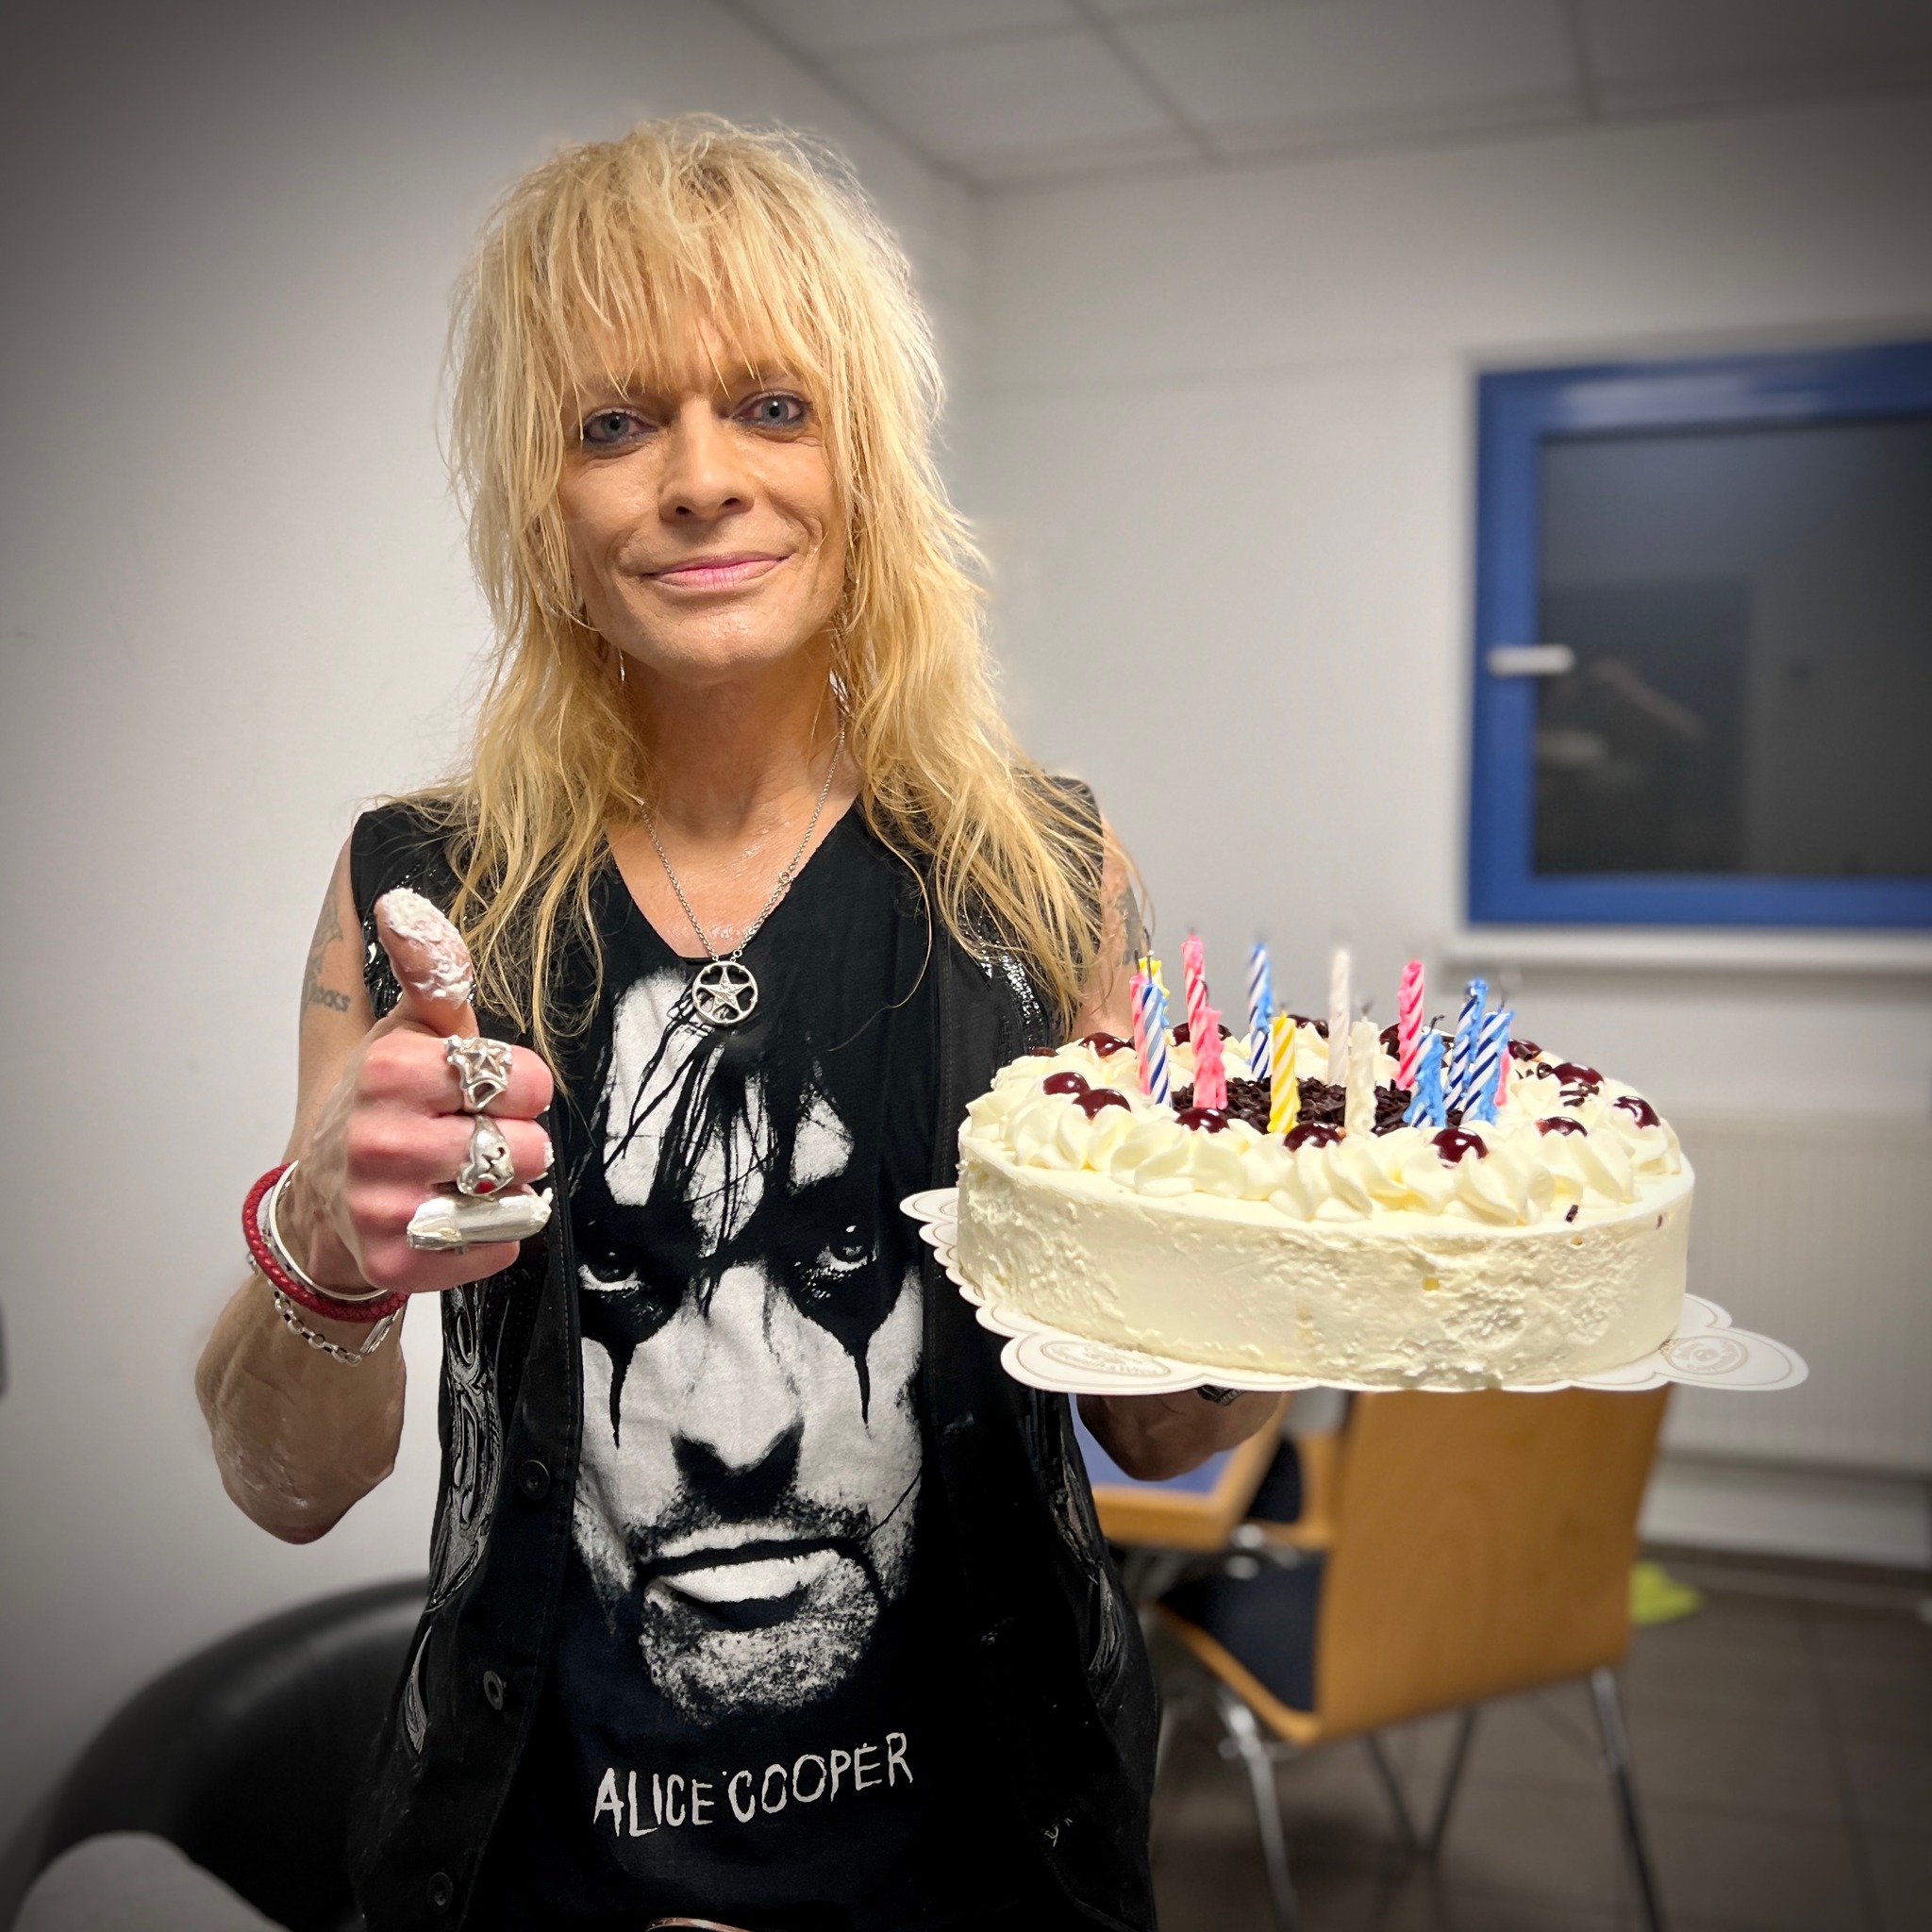 INTERVIEW: Michael Monroe - The Demolition 23 and 60th Birthday